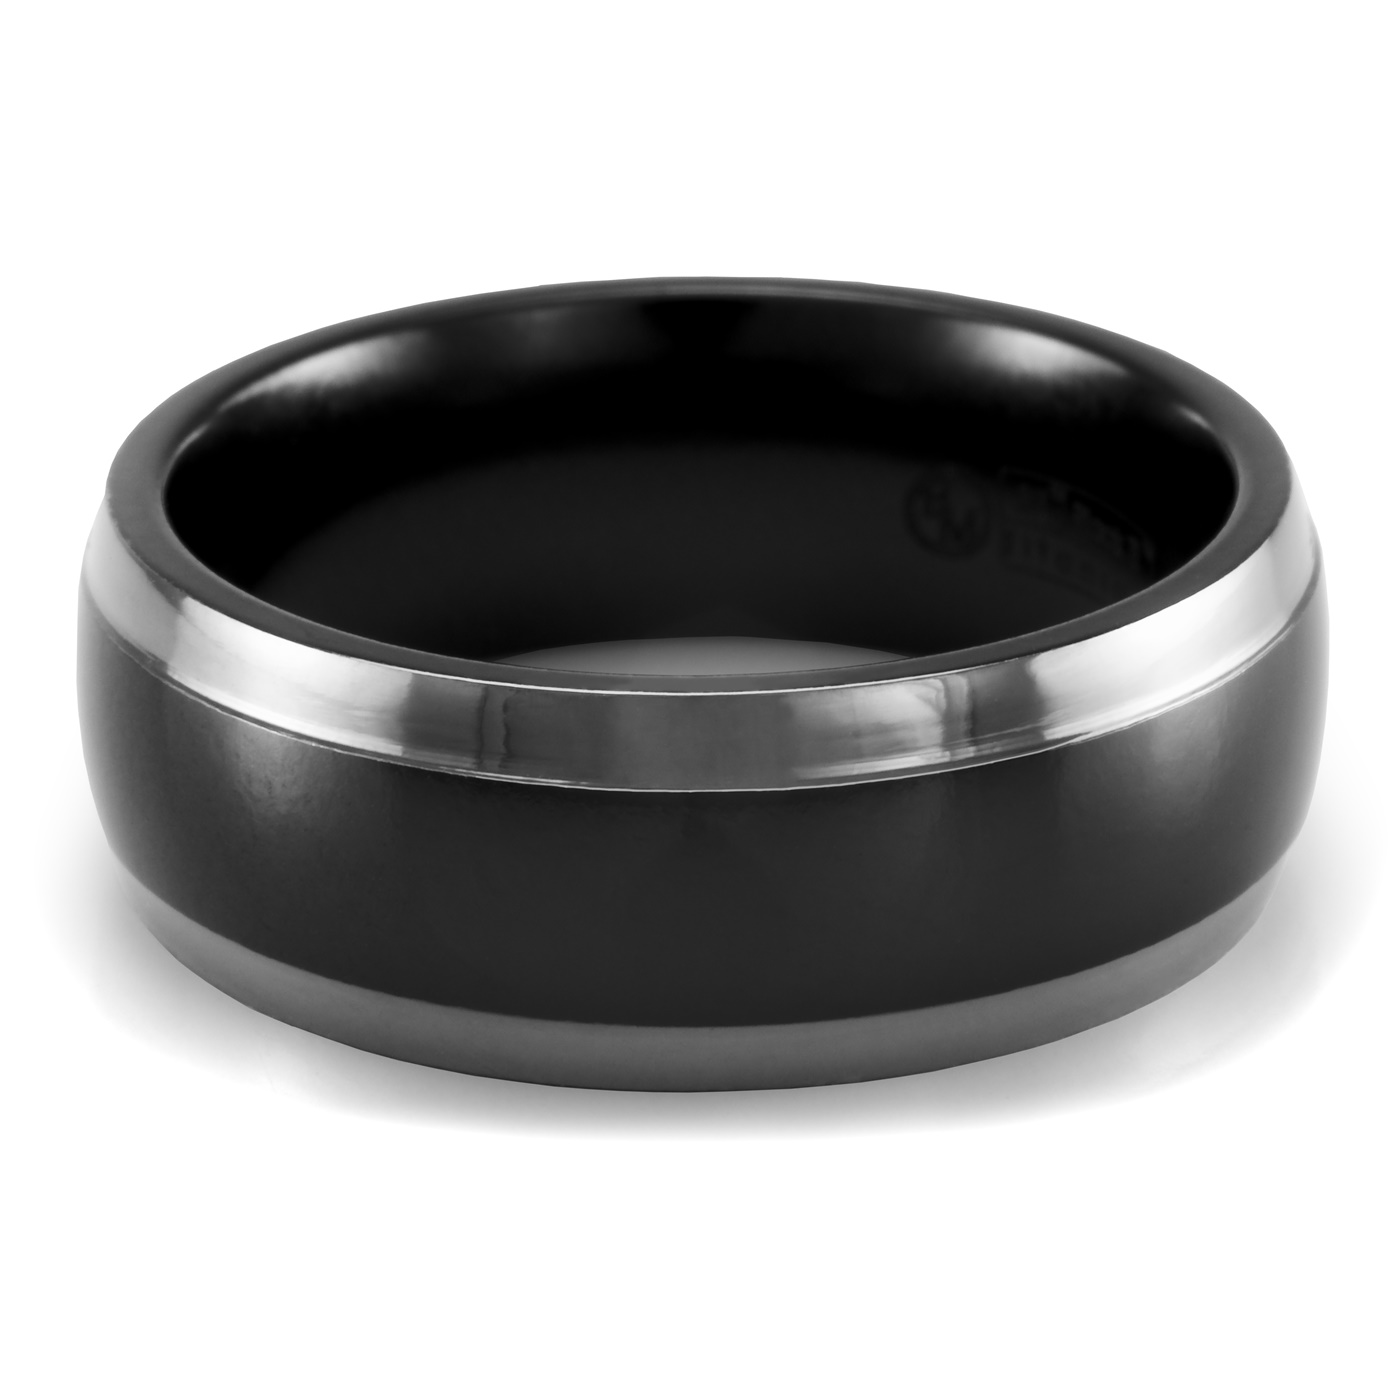 Mens Jewelry and Accessories Rings Wedding Bands Edward Mirell Black Ti Polished Faceted Edges 8mm Ring Size 10.5 